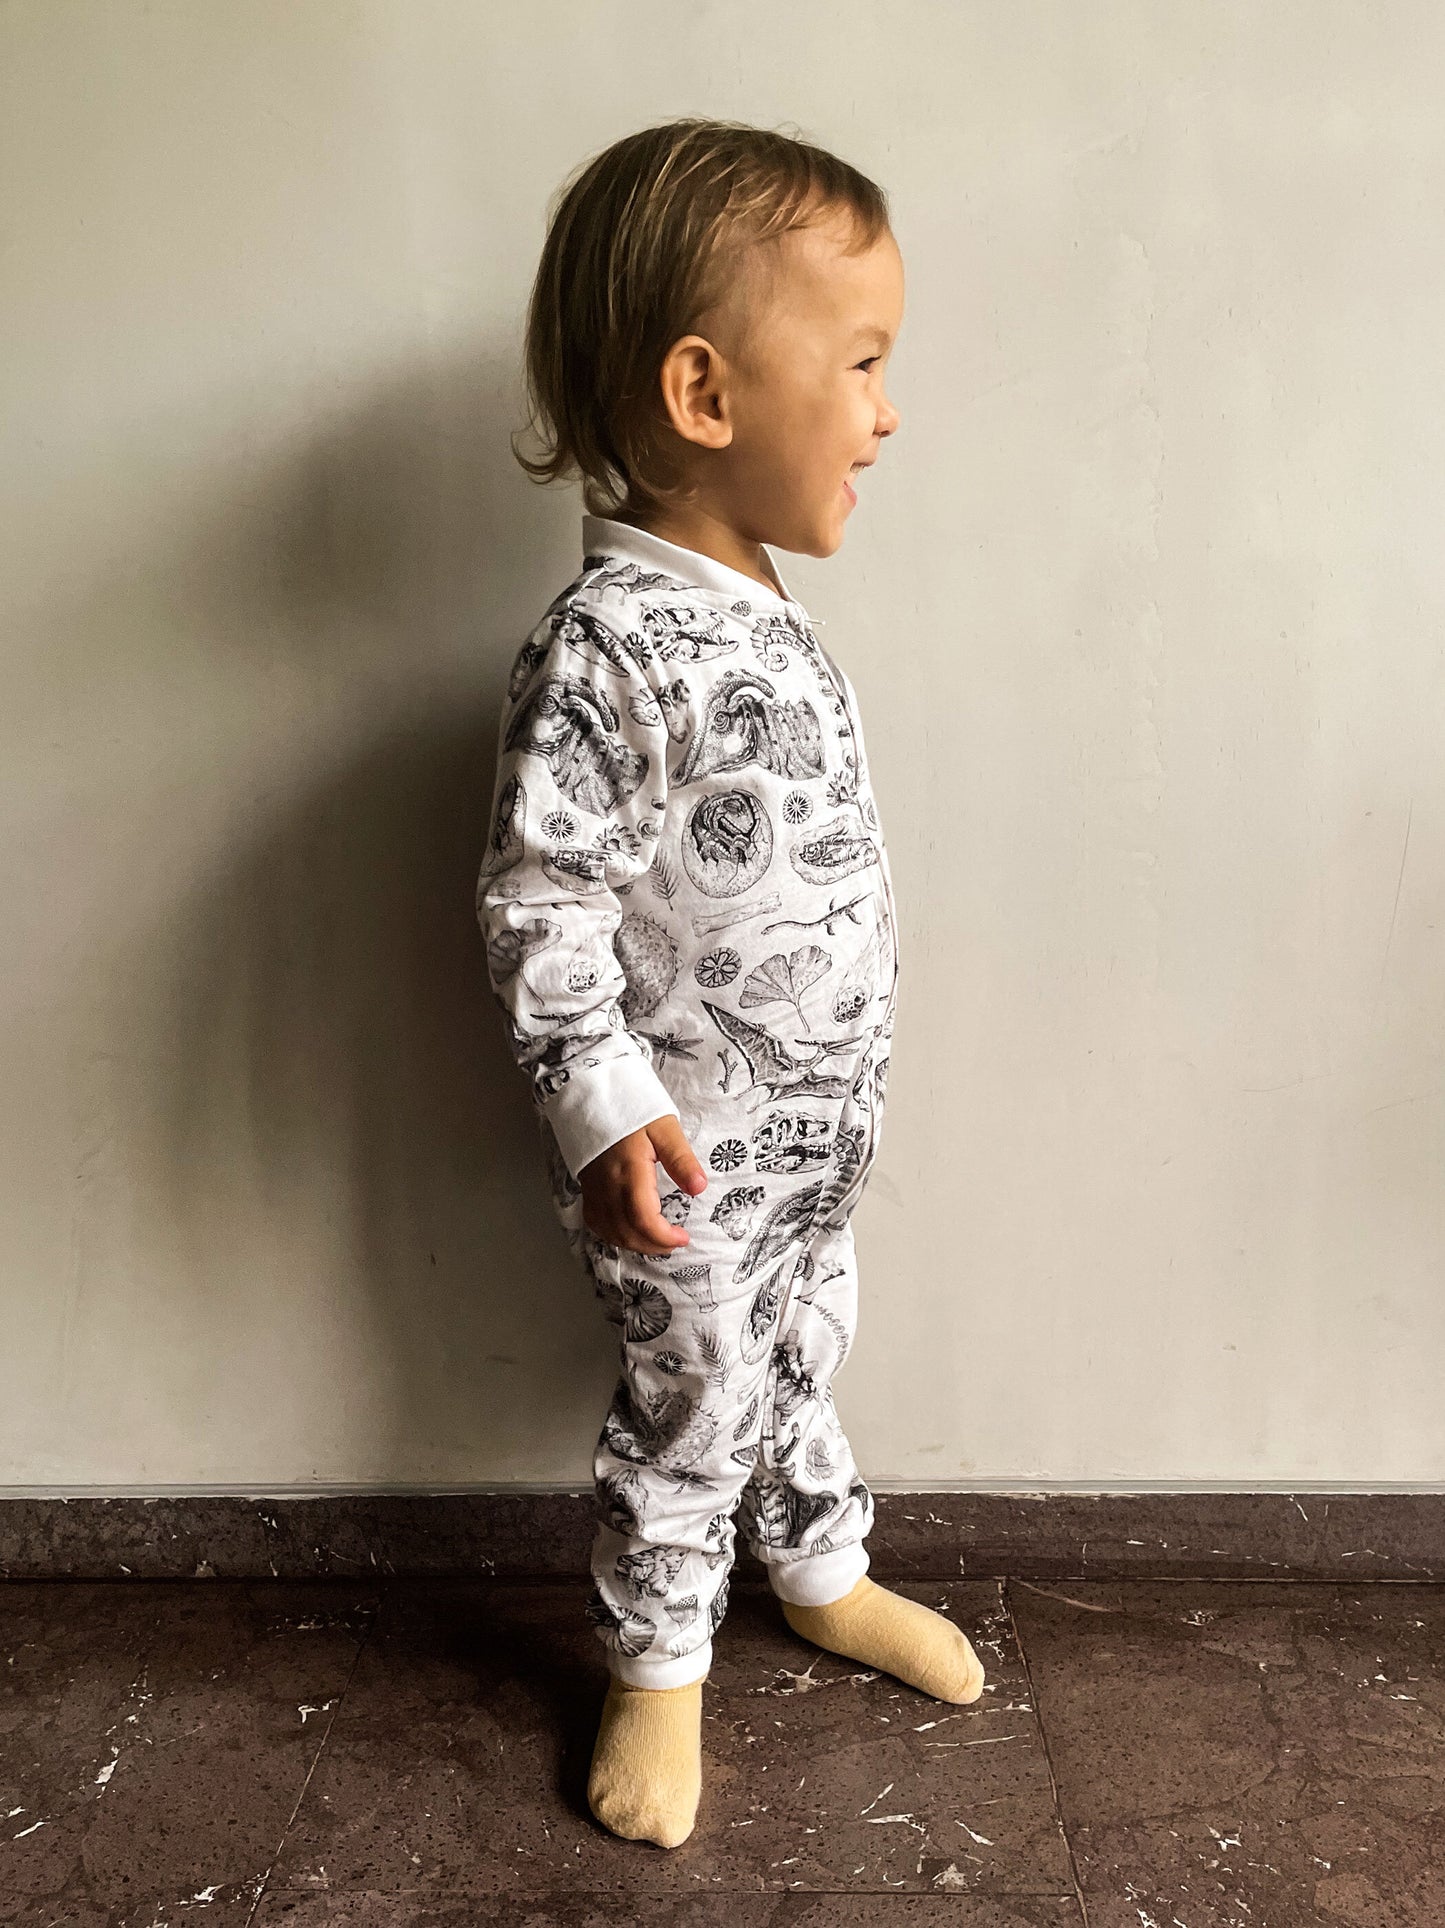 Babies or Explorers to be will sleep soundly in this lightweight soft cotton pyjama. Are you ready for prehistoric cuddles with your little one? This soft and comfy Onesie features prehistoric illustrations by Tattoo-Artist Suflanda!